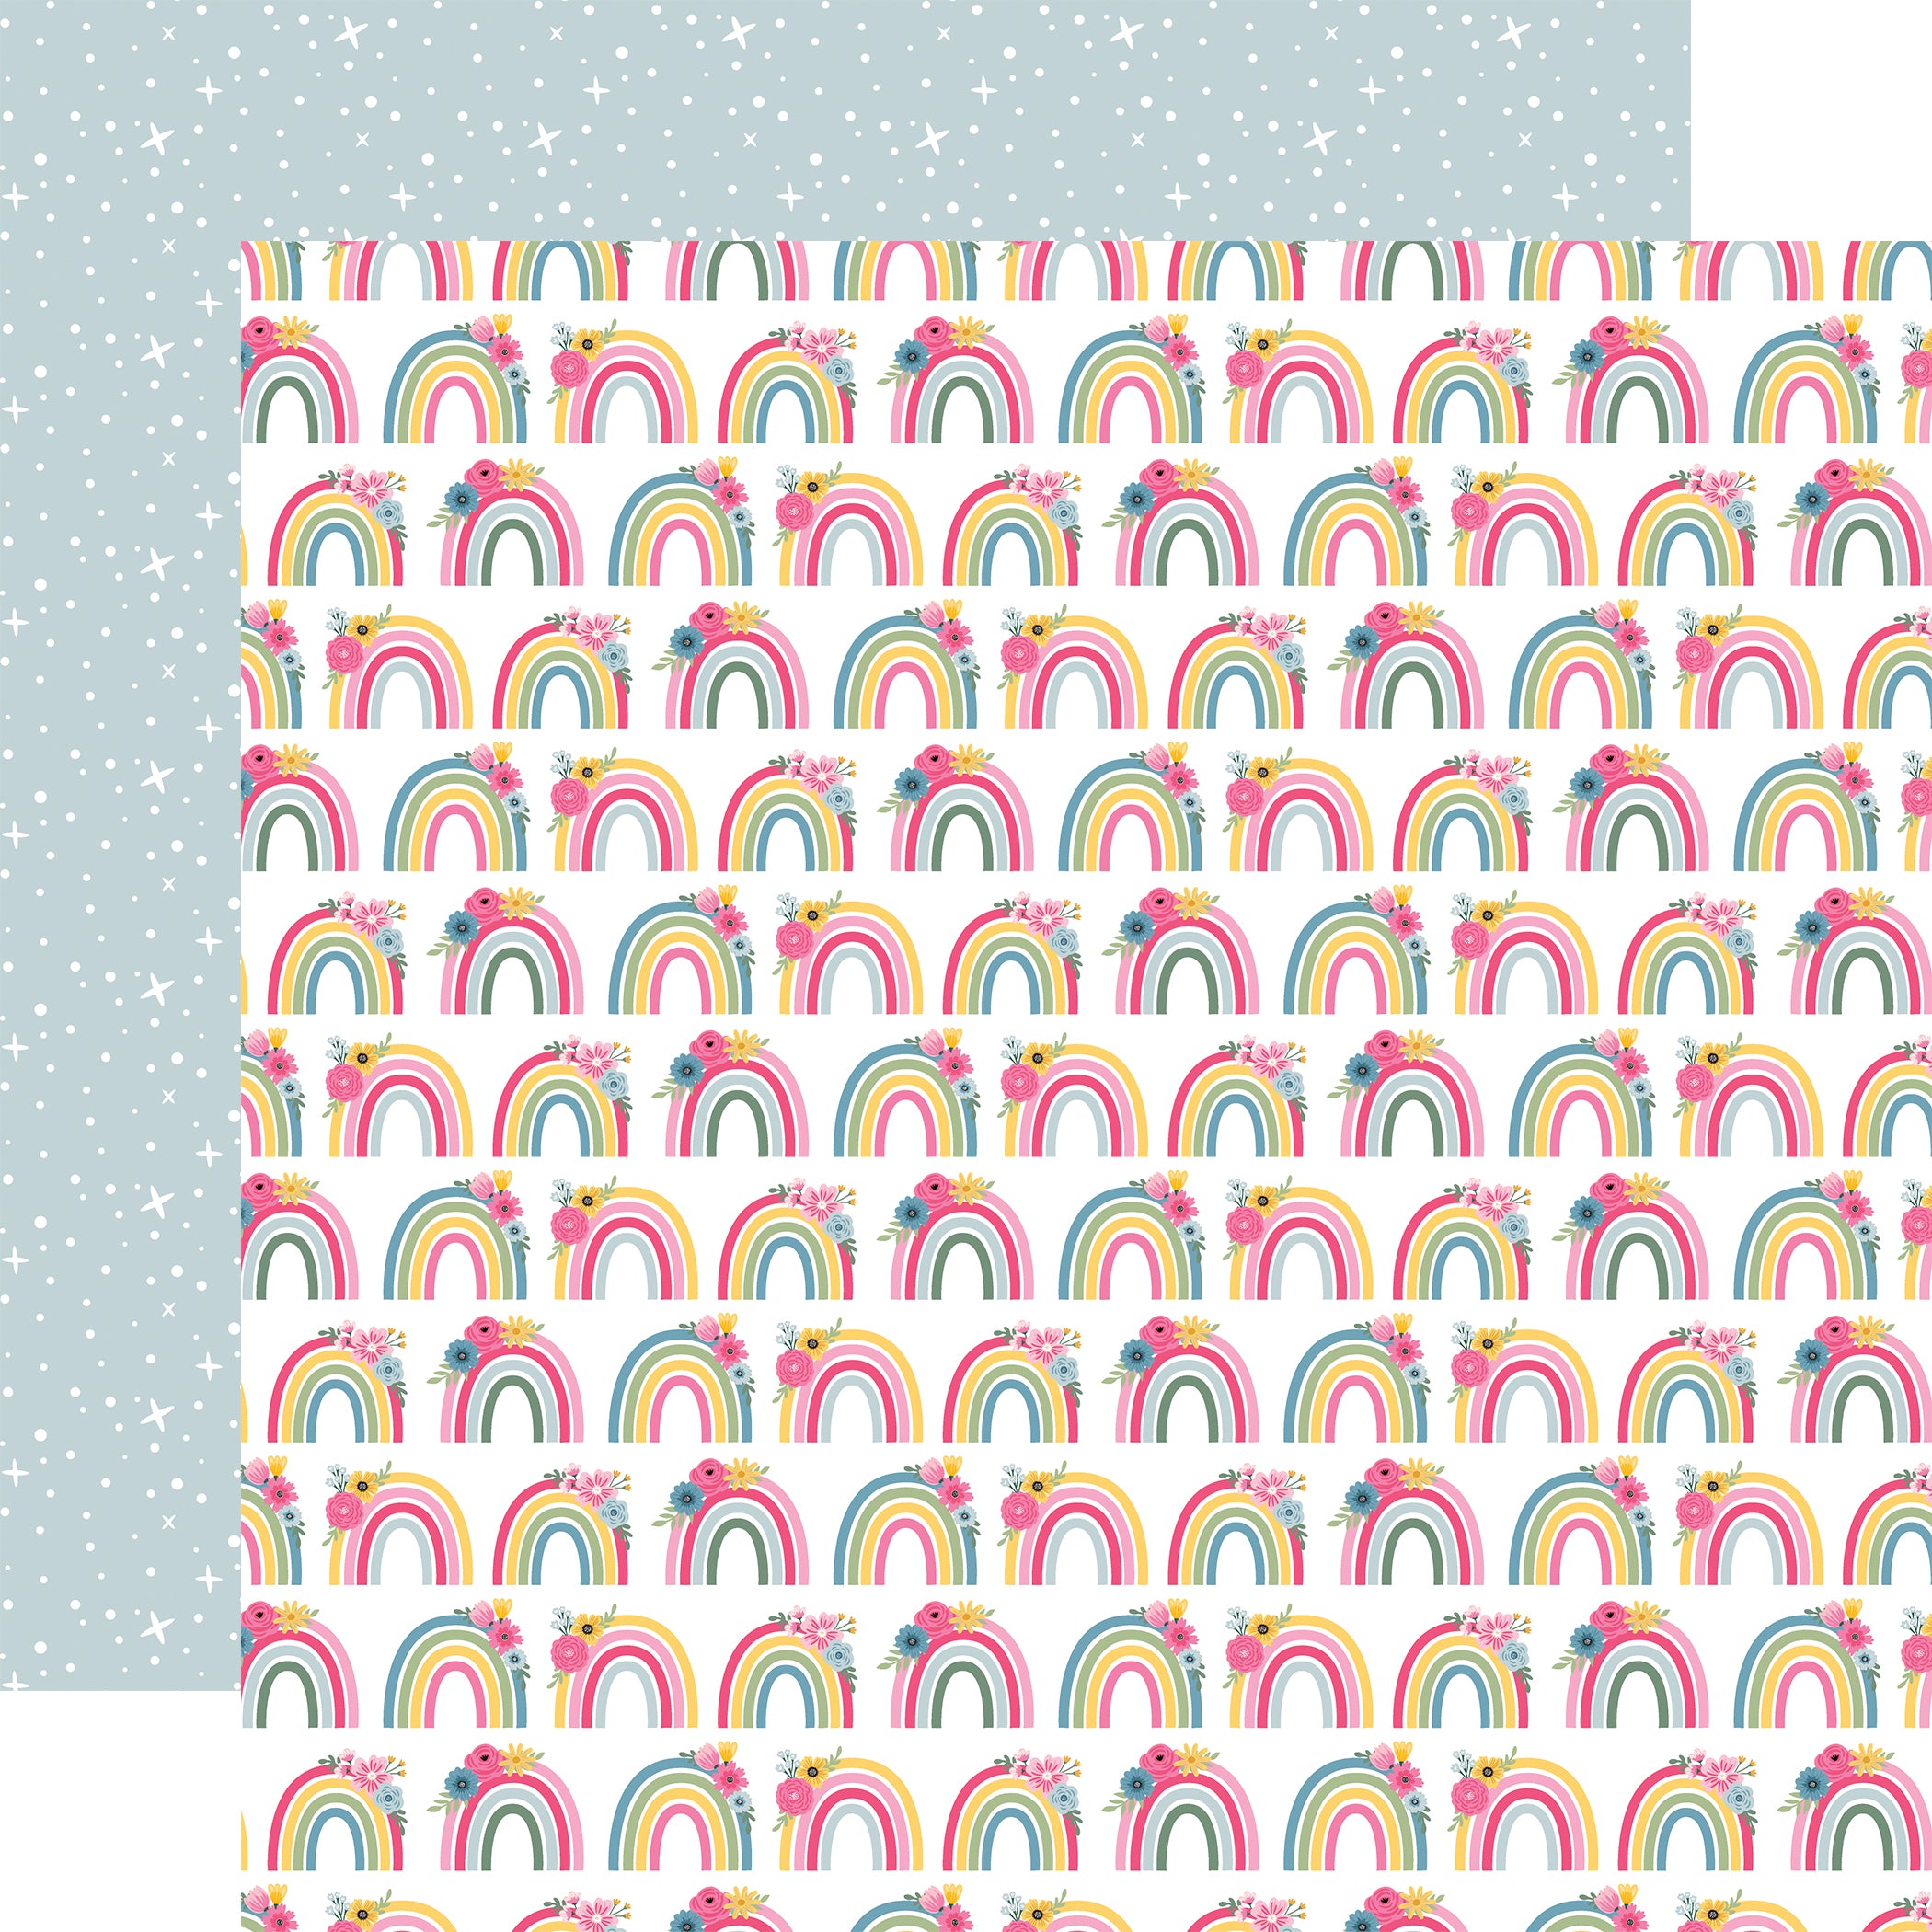 Fairy Garden Collection Garden Rainbows 12 x 12 Double-Sided Scrapbook Paper by Echo Park Paper